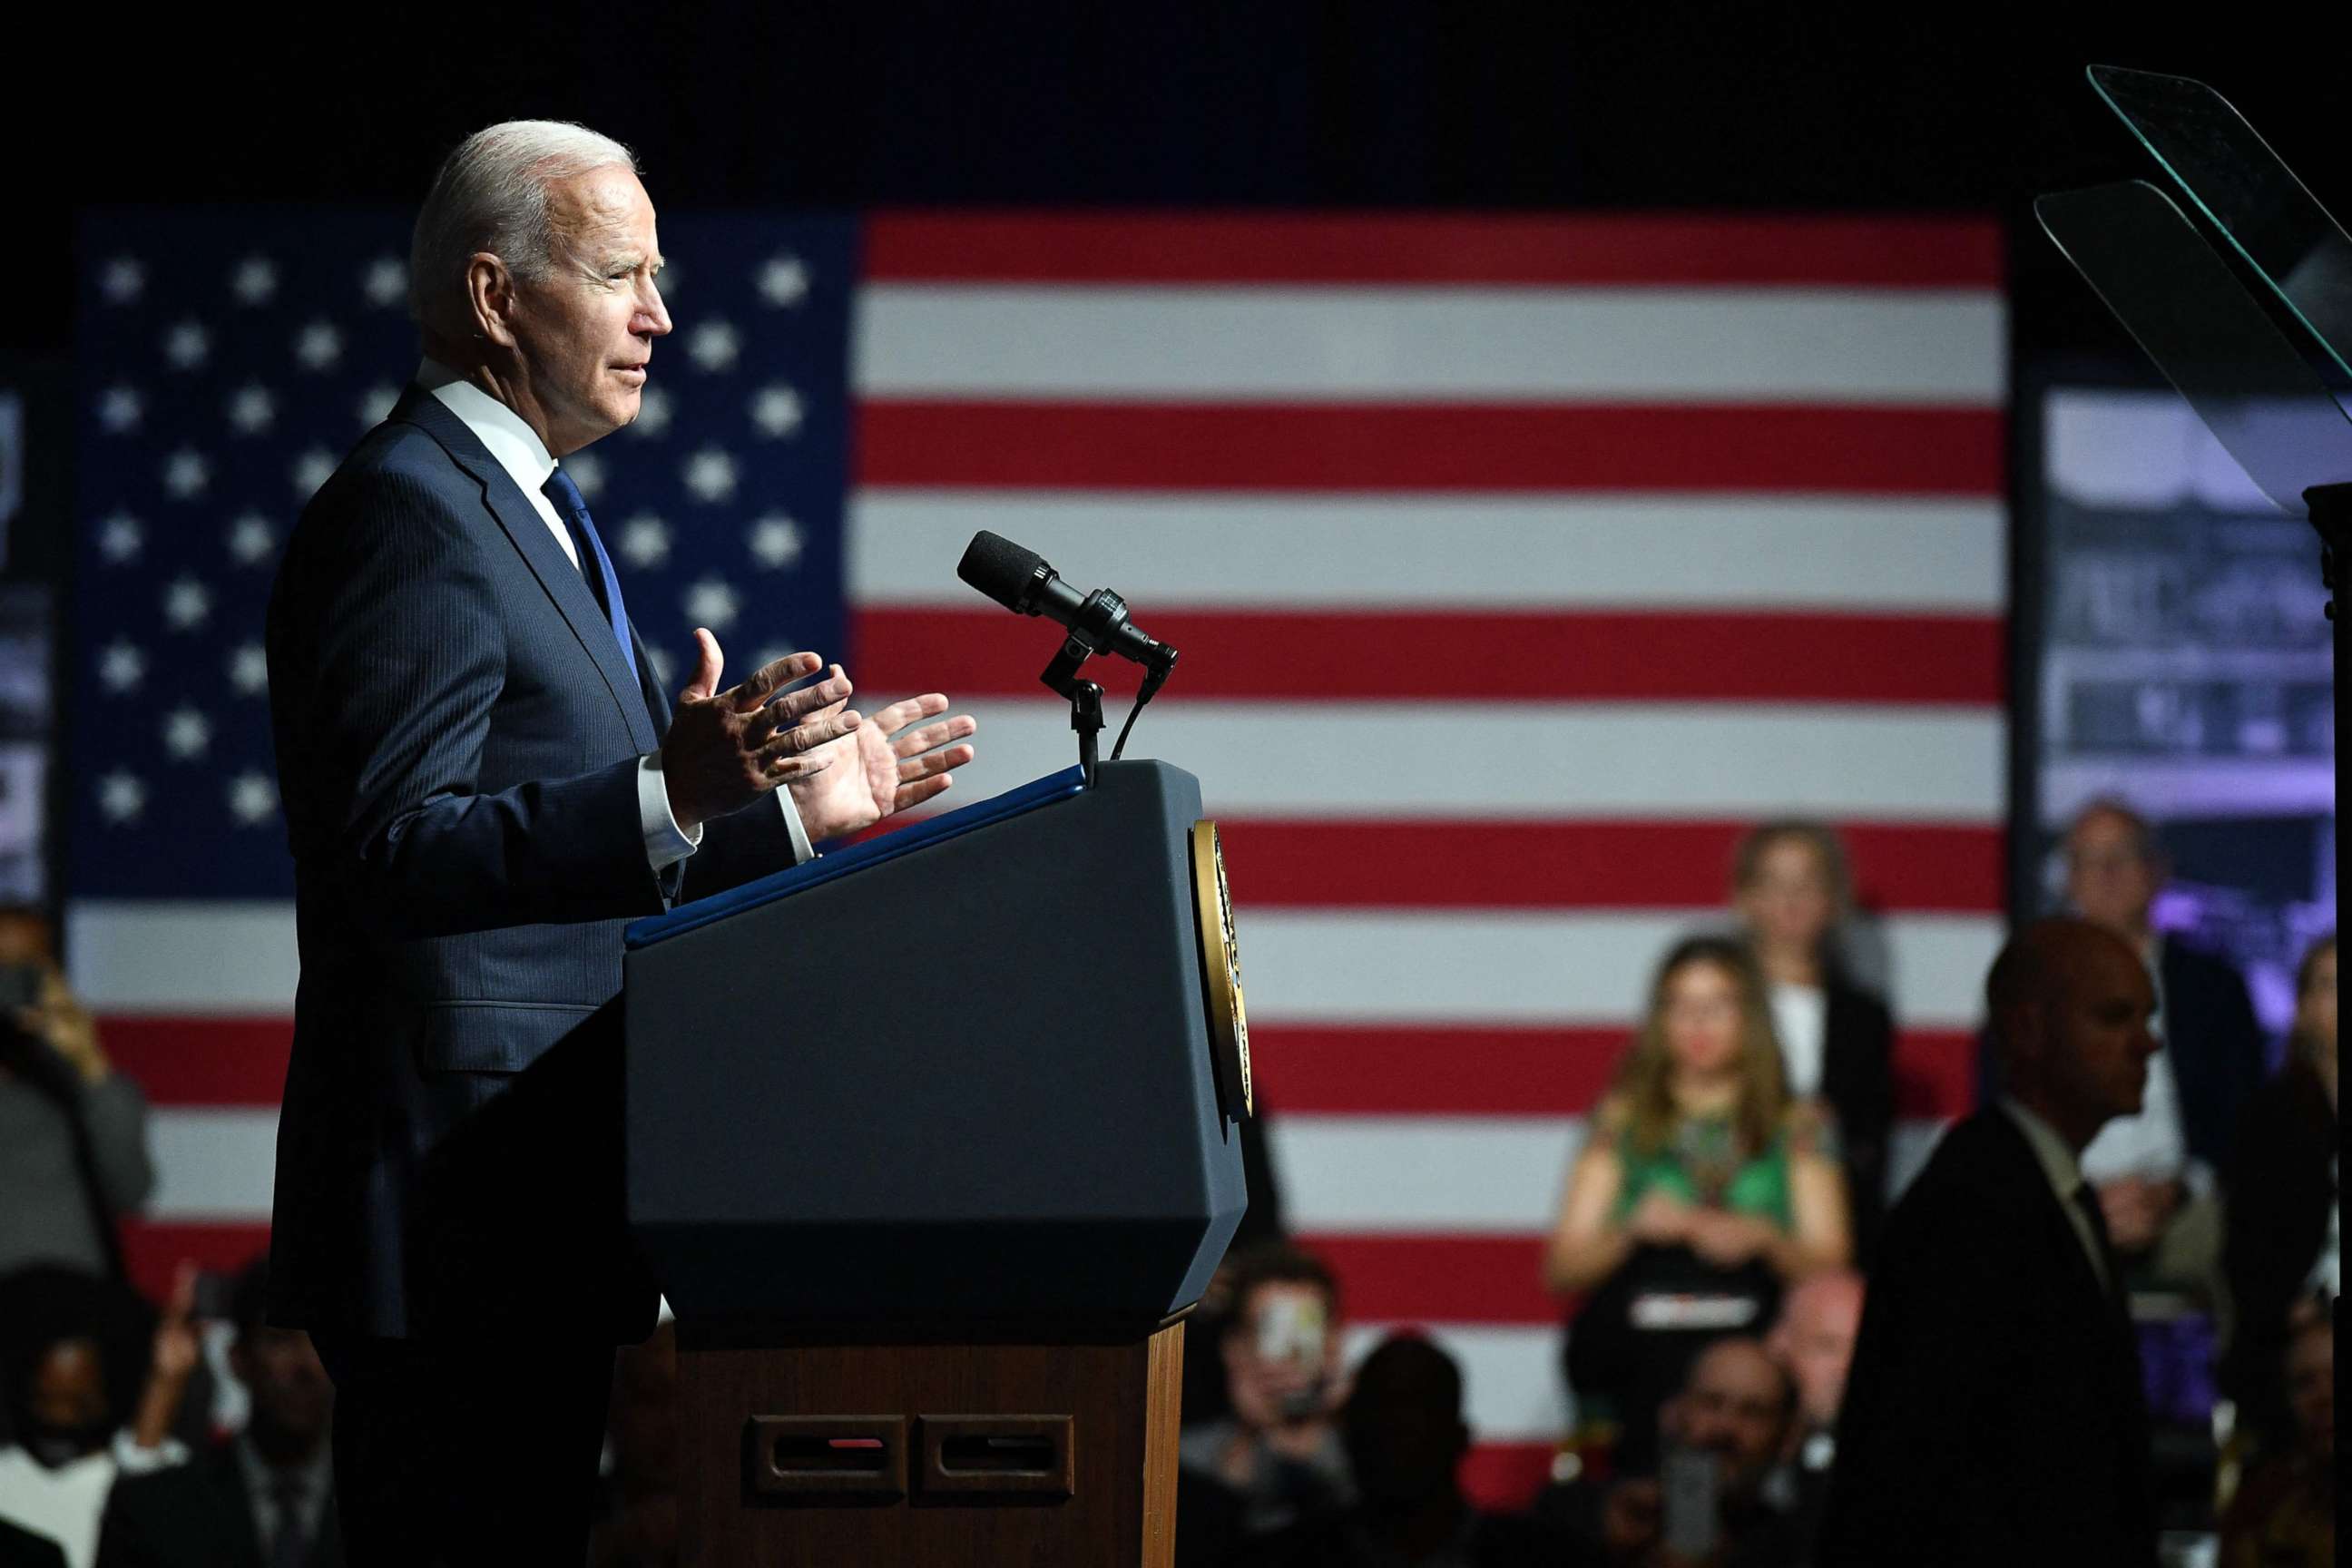 PHOTO: President Joe Biden delivers remarks to commemorate the 100th anniversary of the Tulsa Race Massacre at the Greenwood Cultural Center in Tulsa, Oklahoma on June 1, 2021.